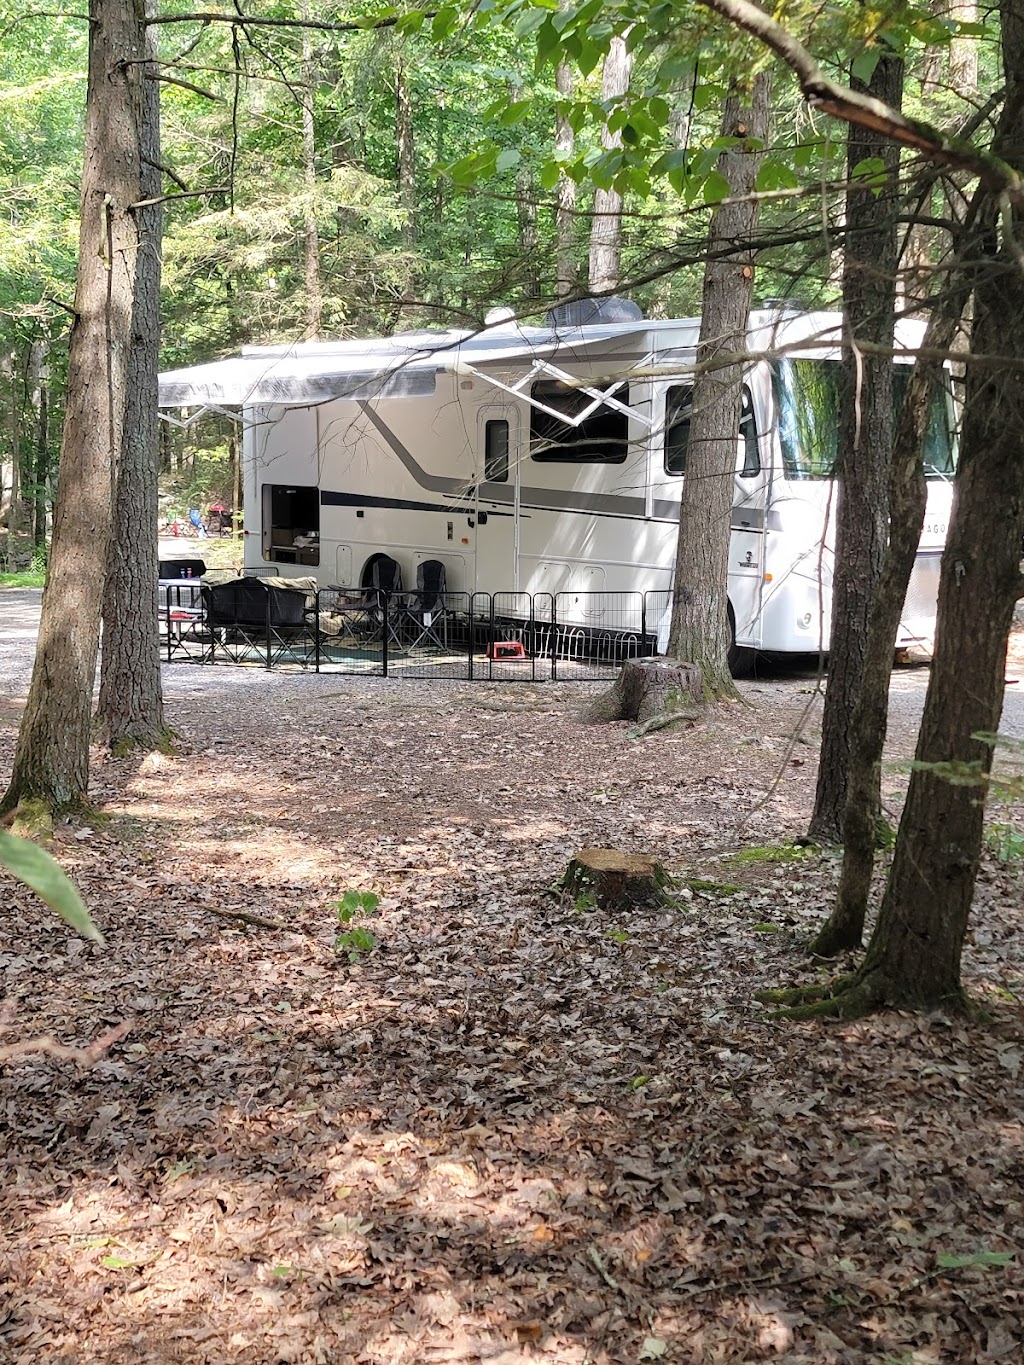 Rip Van Winkle Campgrounds Inc | 149 Blue Mountain Rd, Saugerties, NY 12477 | Phone: (845) 246-8334